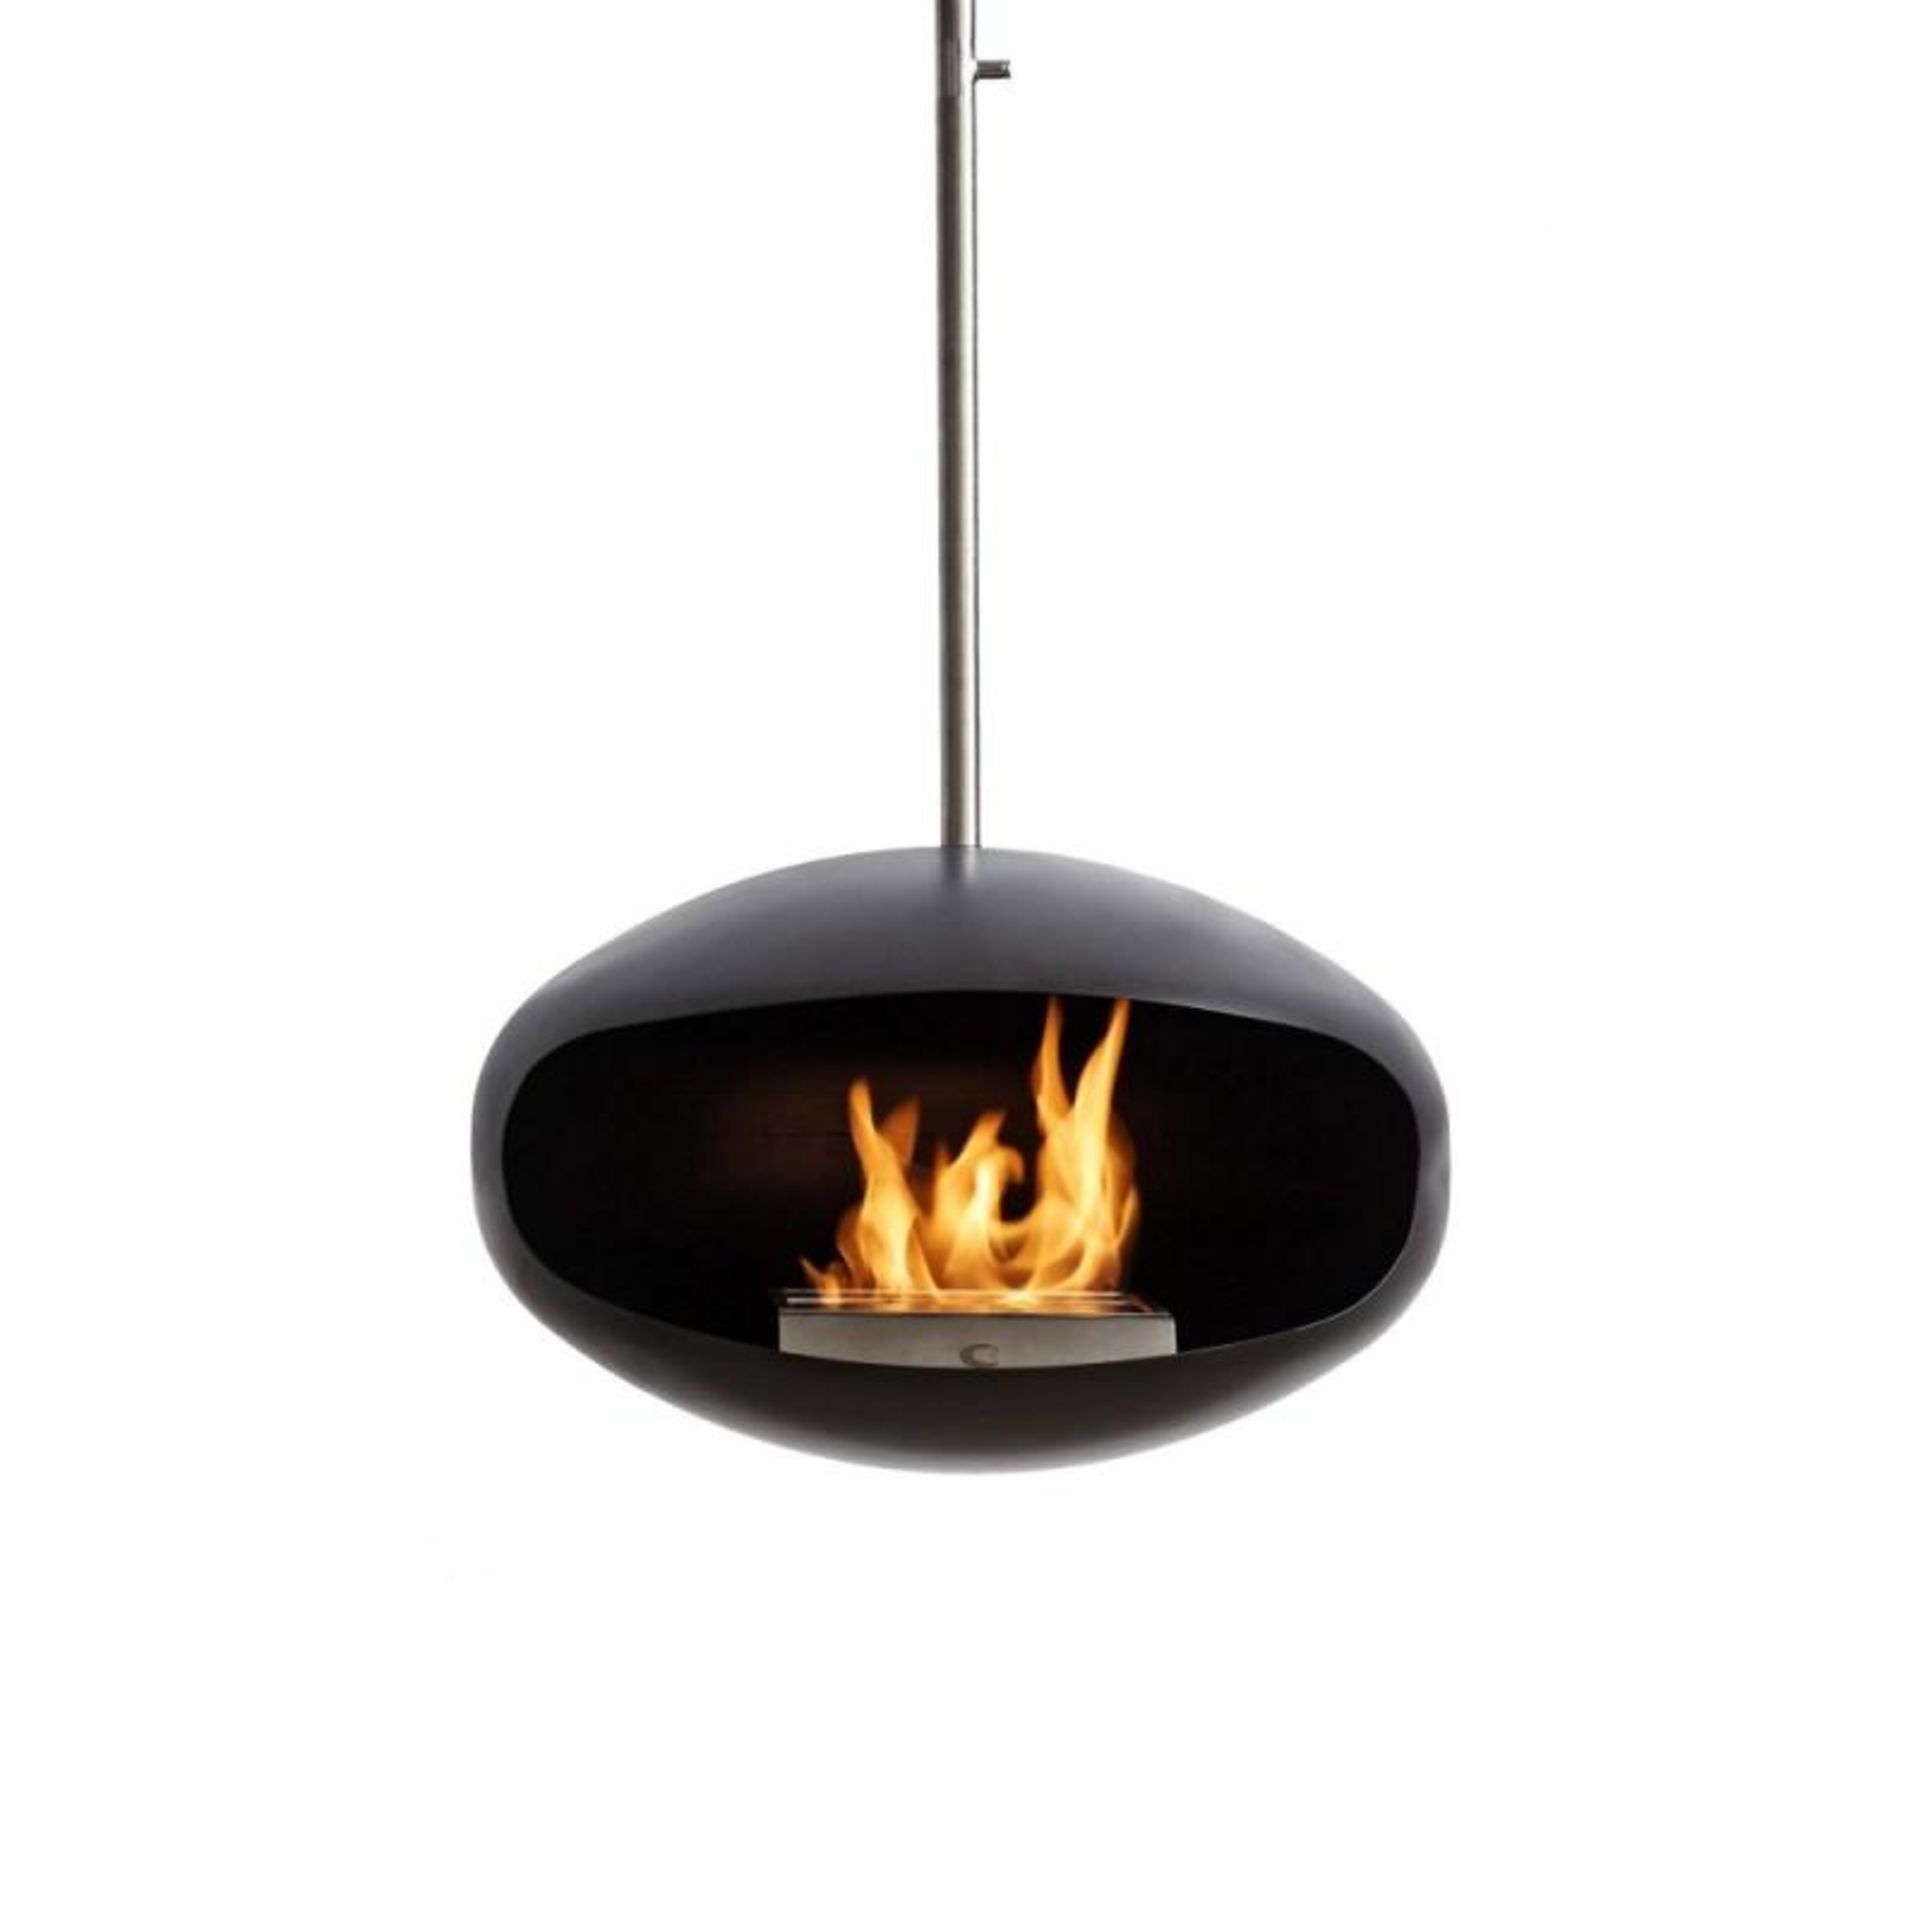 1 x Aeris Hanging Cocoon Fireplace Finished In Black - CL439 - Location: Ilkley LS29 - Used In Excel